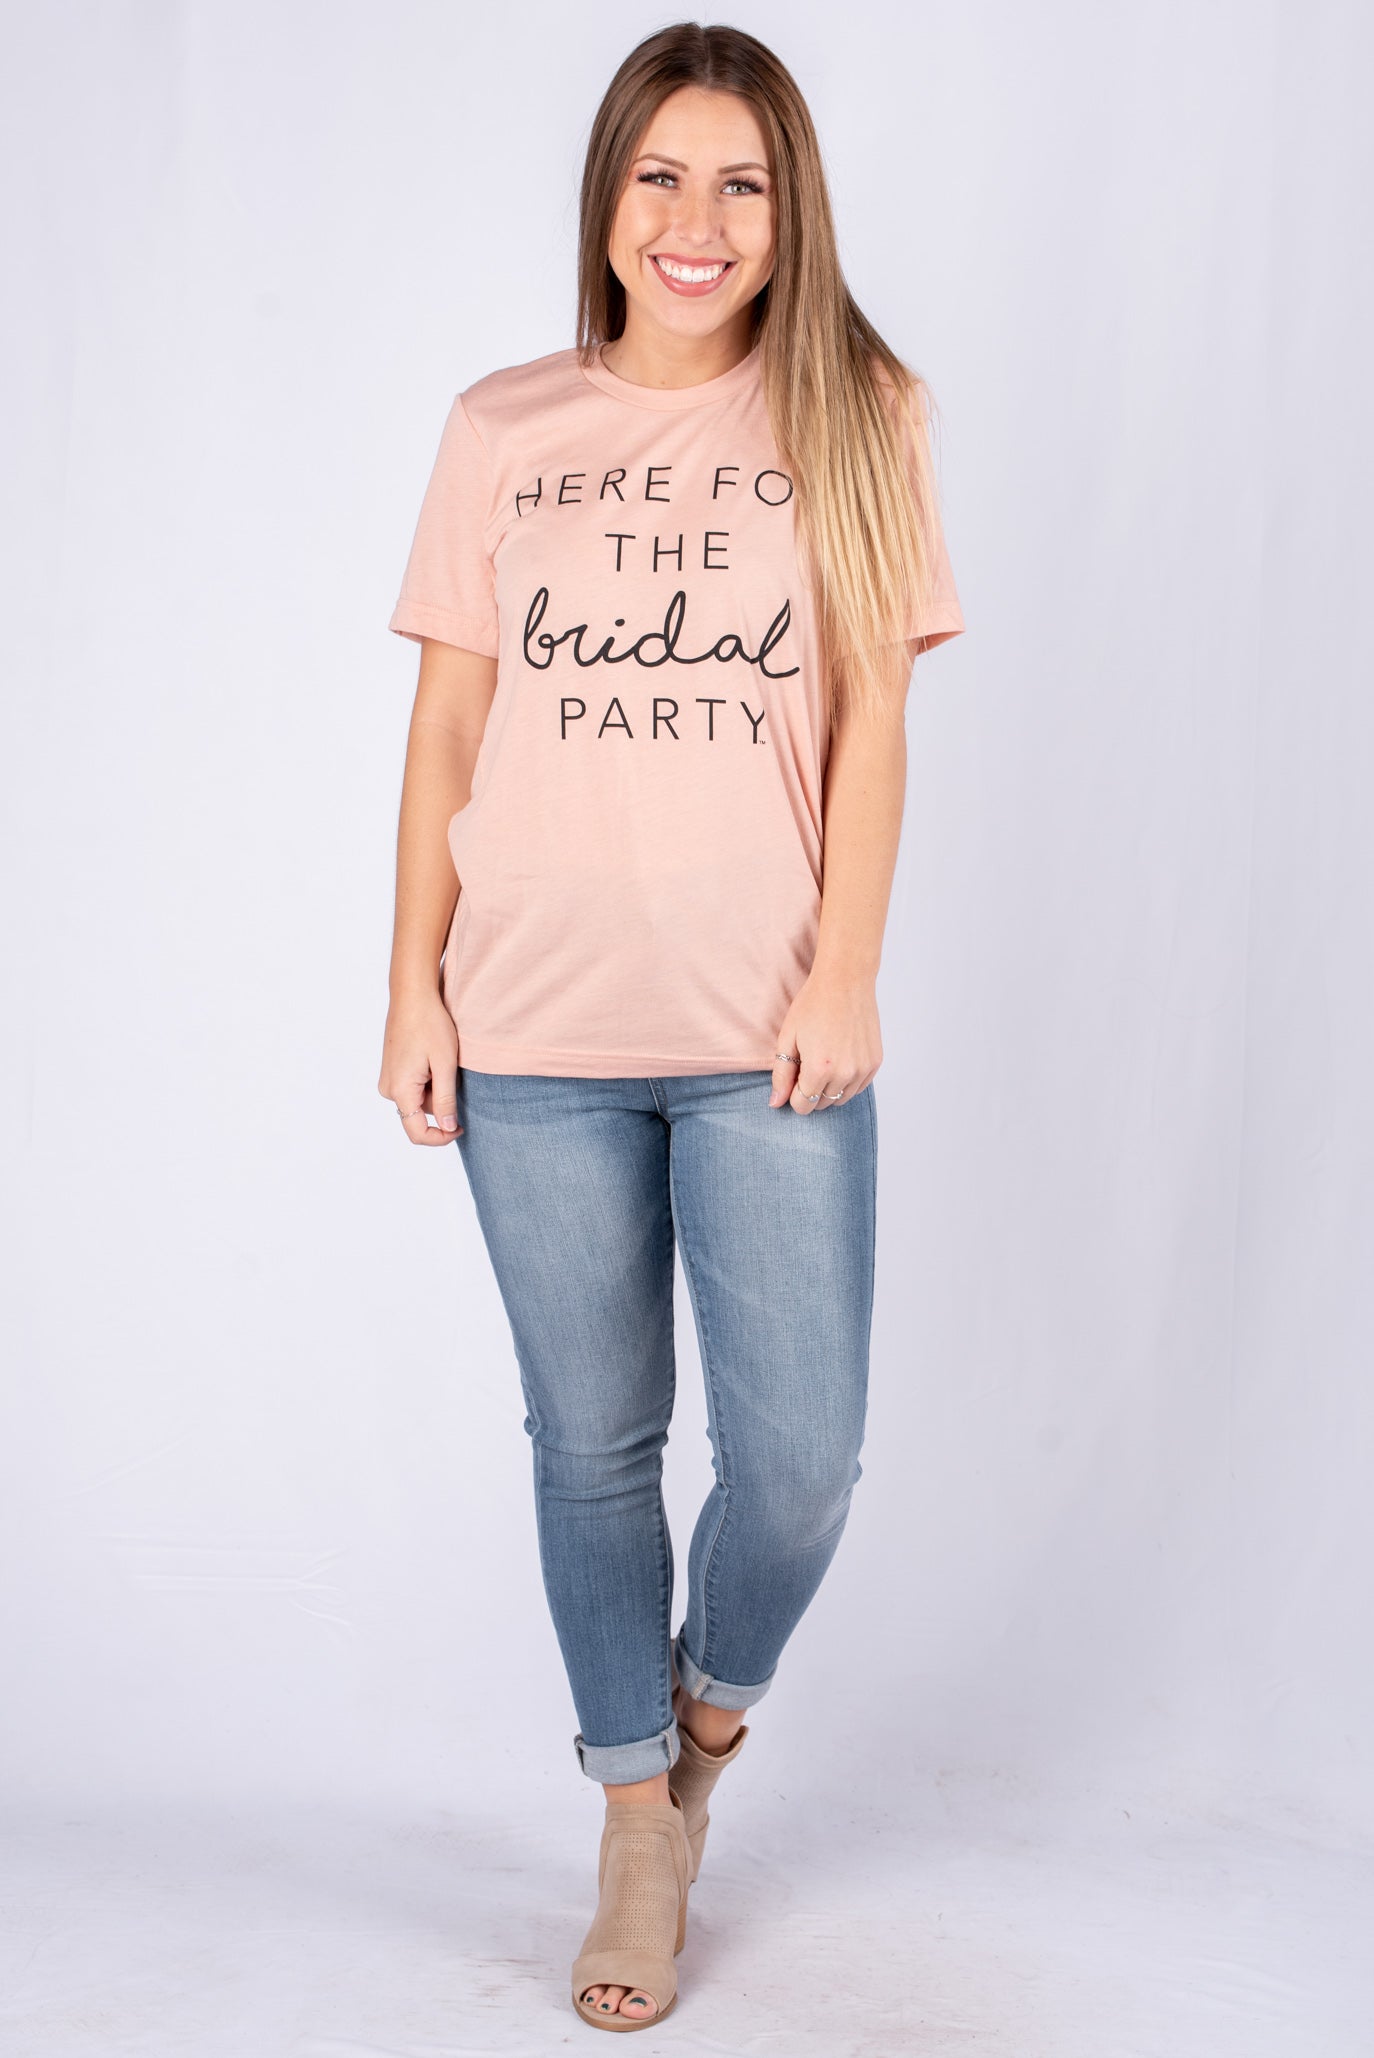 Here for the bridal party unisex short sleeve t-shirt peach - Trendy T-shirts - Cute Graphic Tee Fashion at Lush Fashion Lounge Boutique in Oklahoma